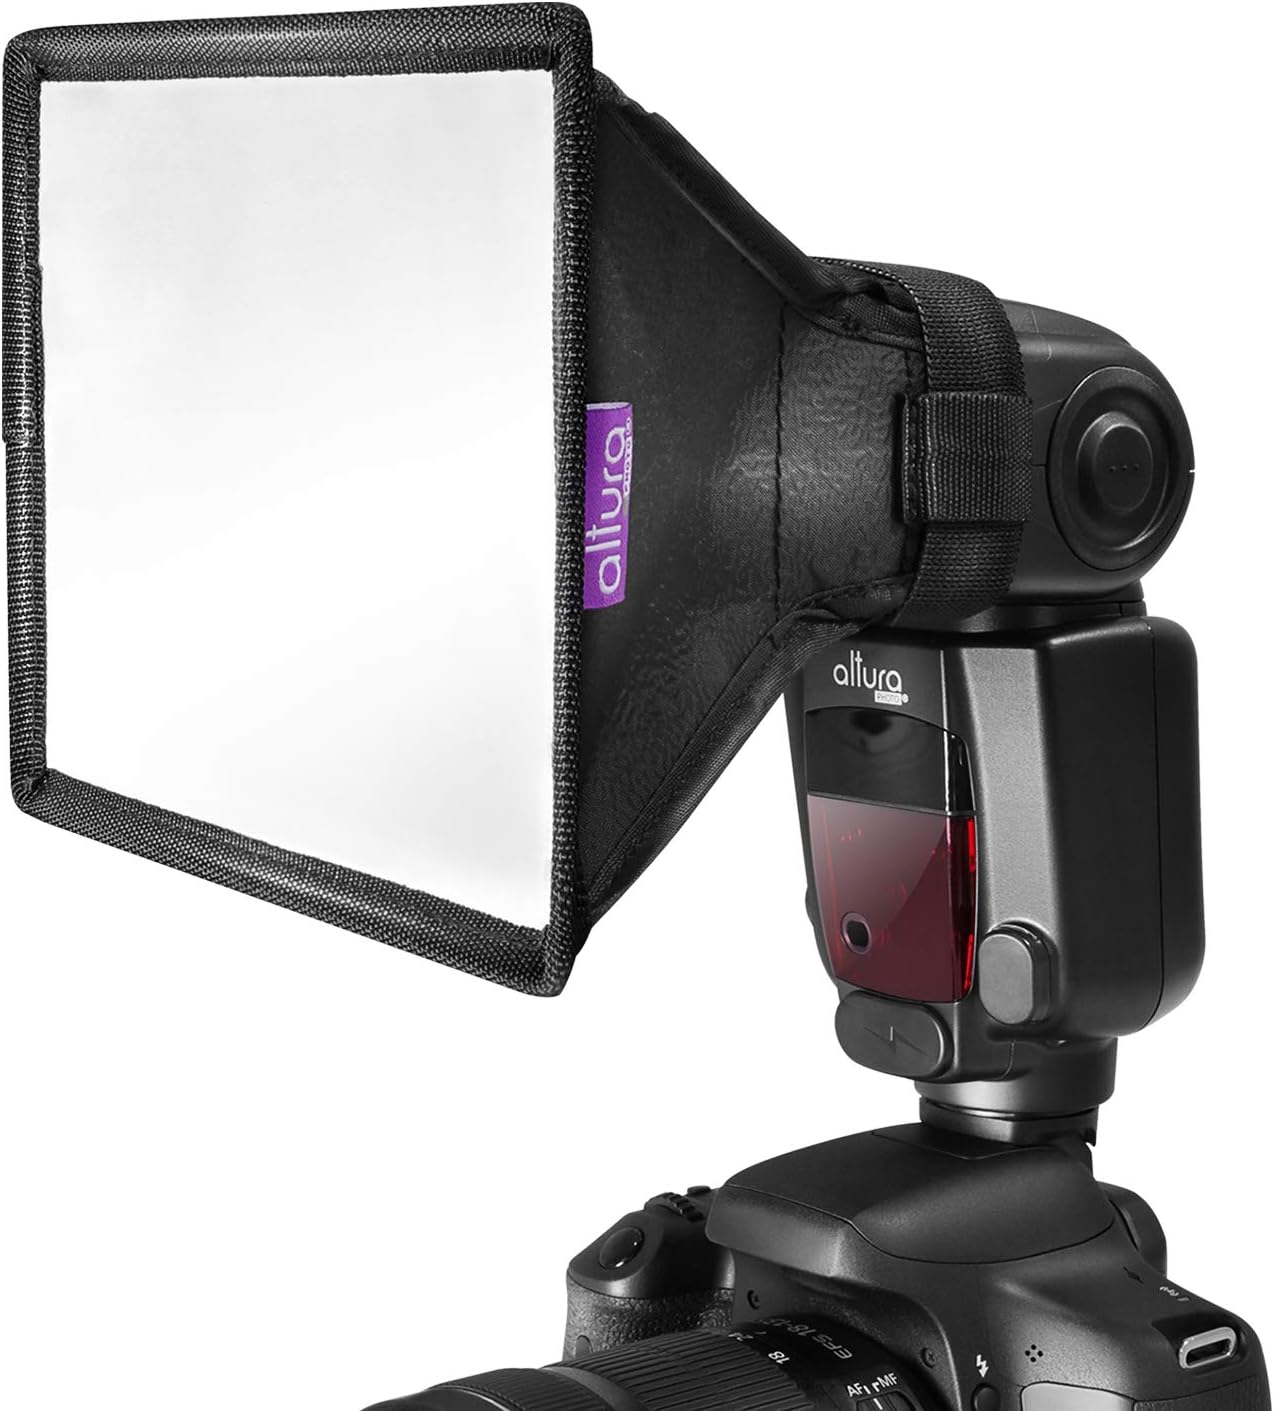 Camera flash and lighting accessories